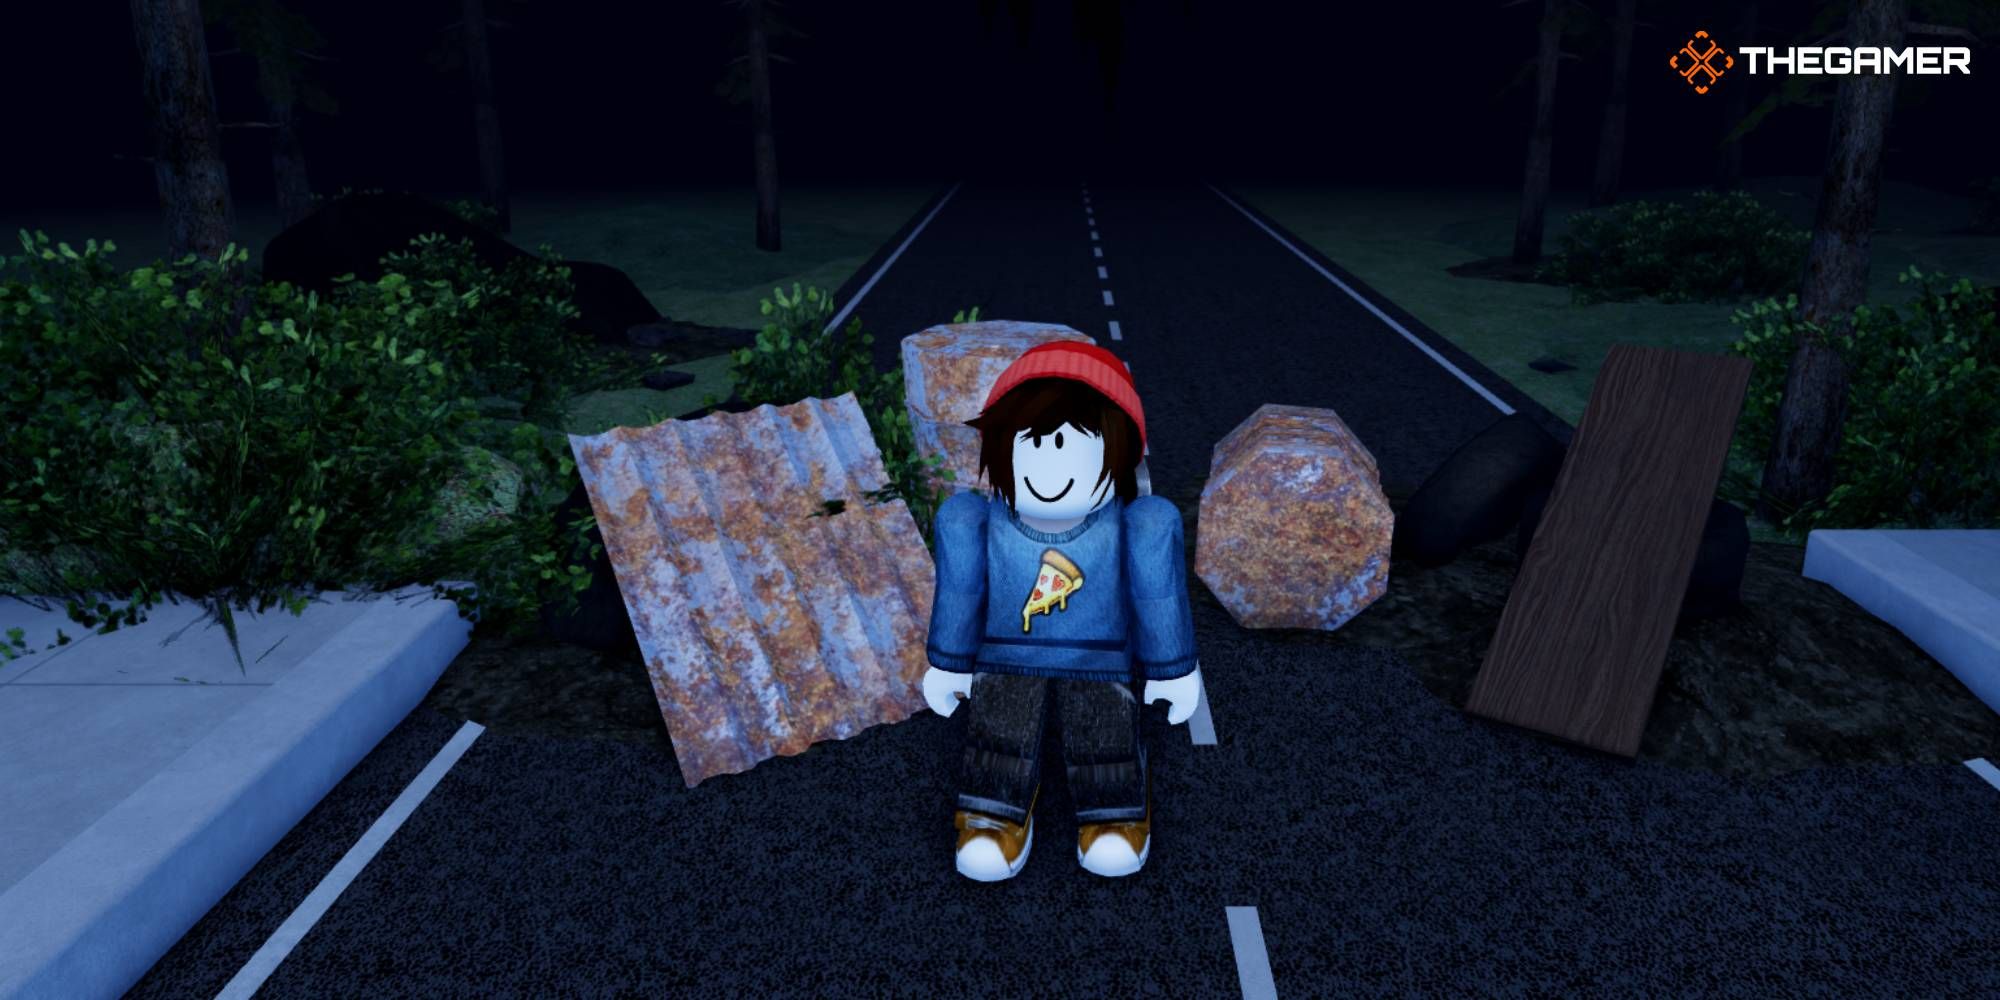 NEW* ALL WORKING CODES FOR SURVIVE THE KILLER IN 2023! ROBLOX